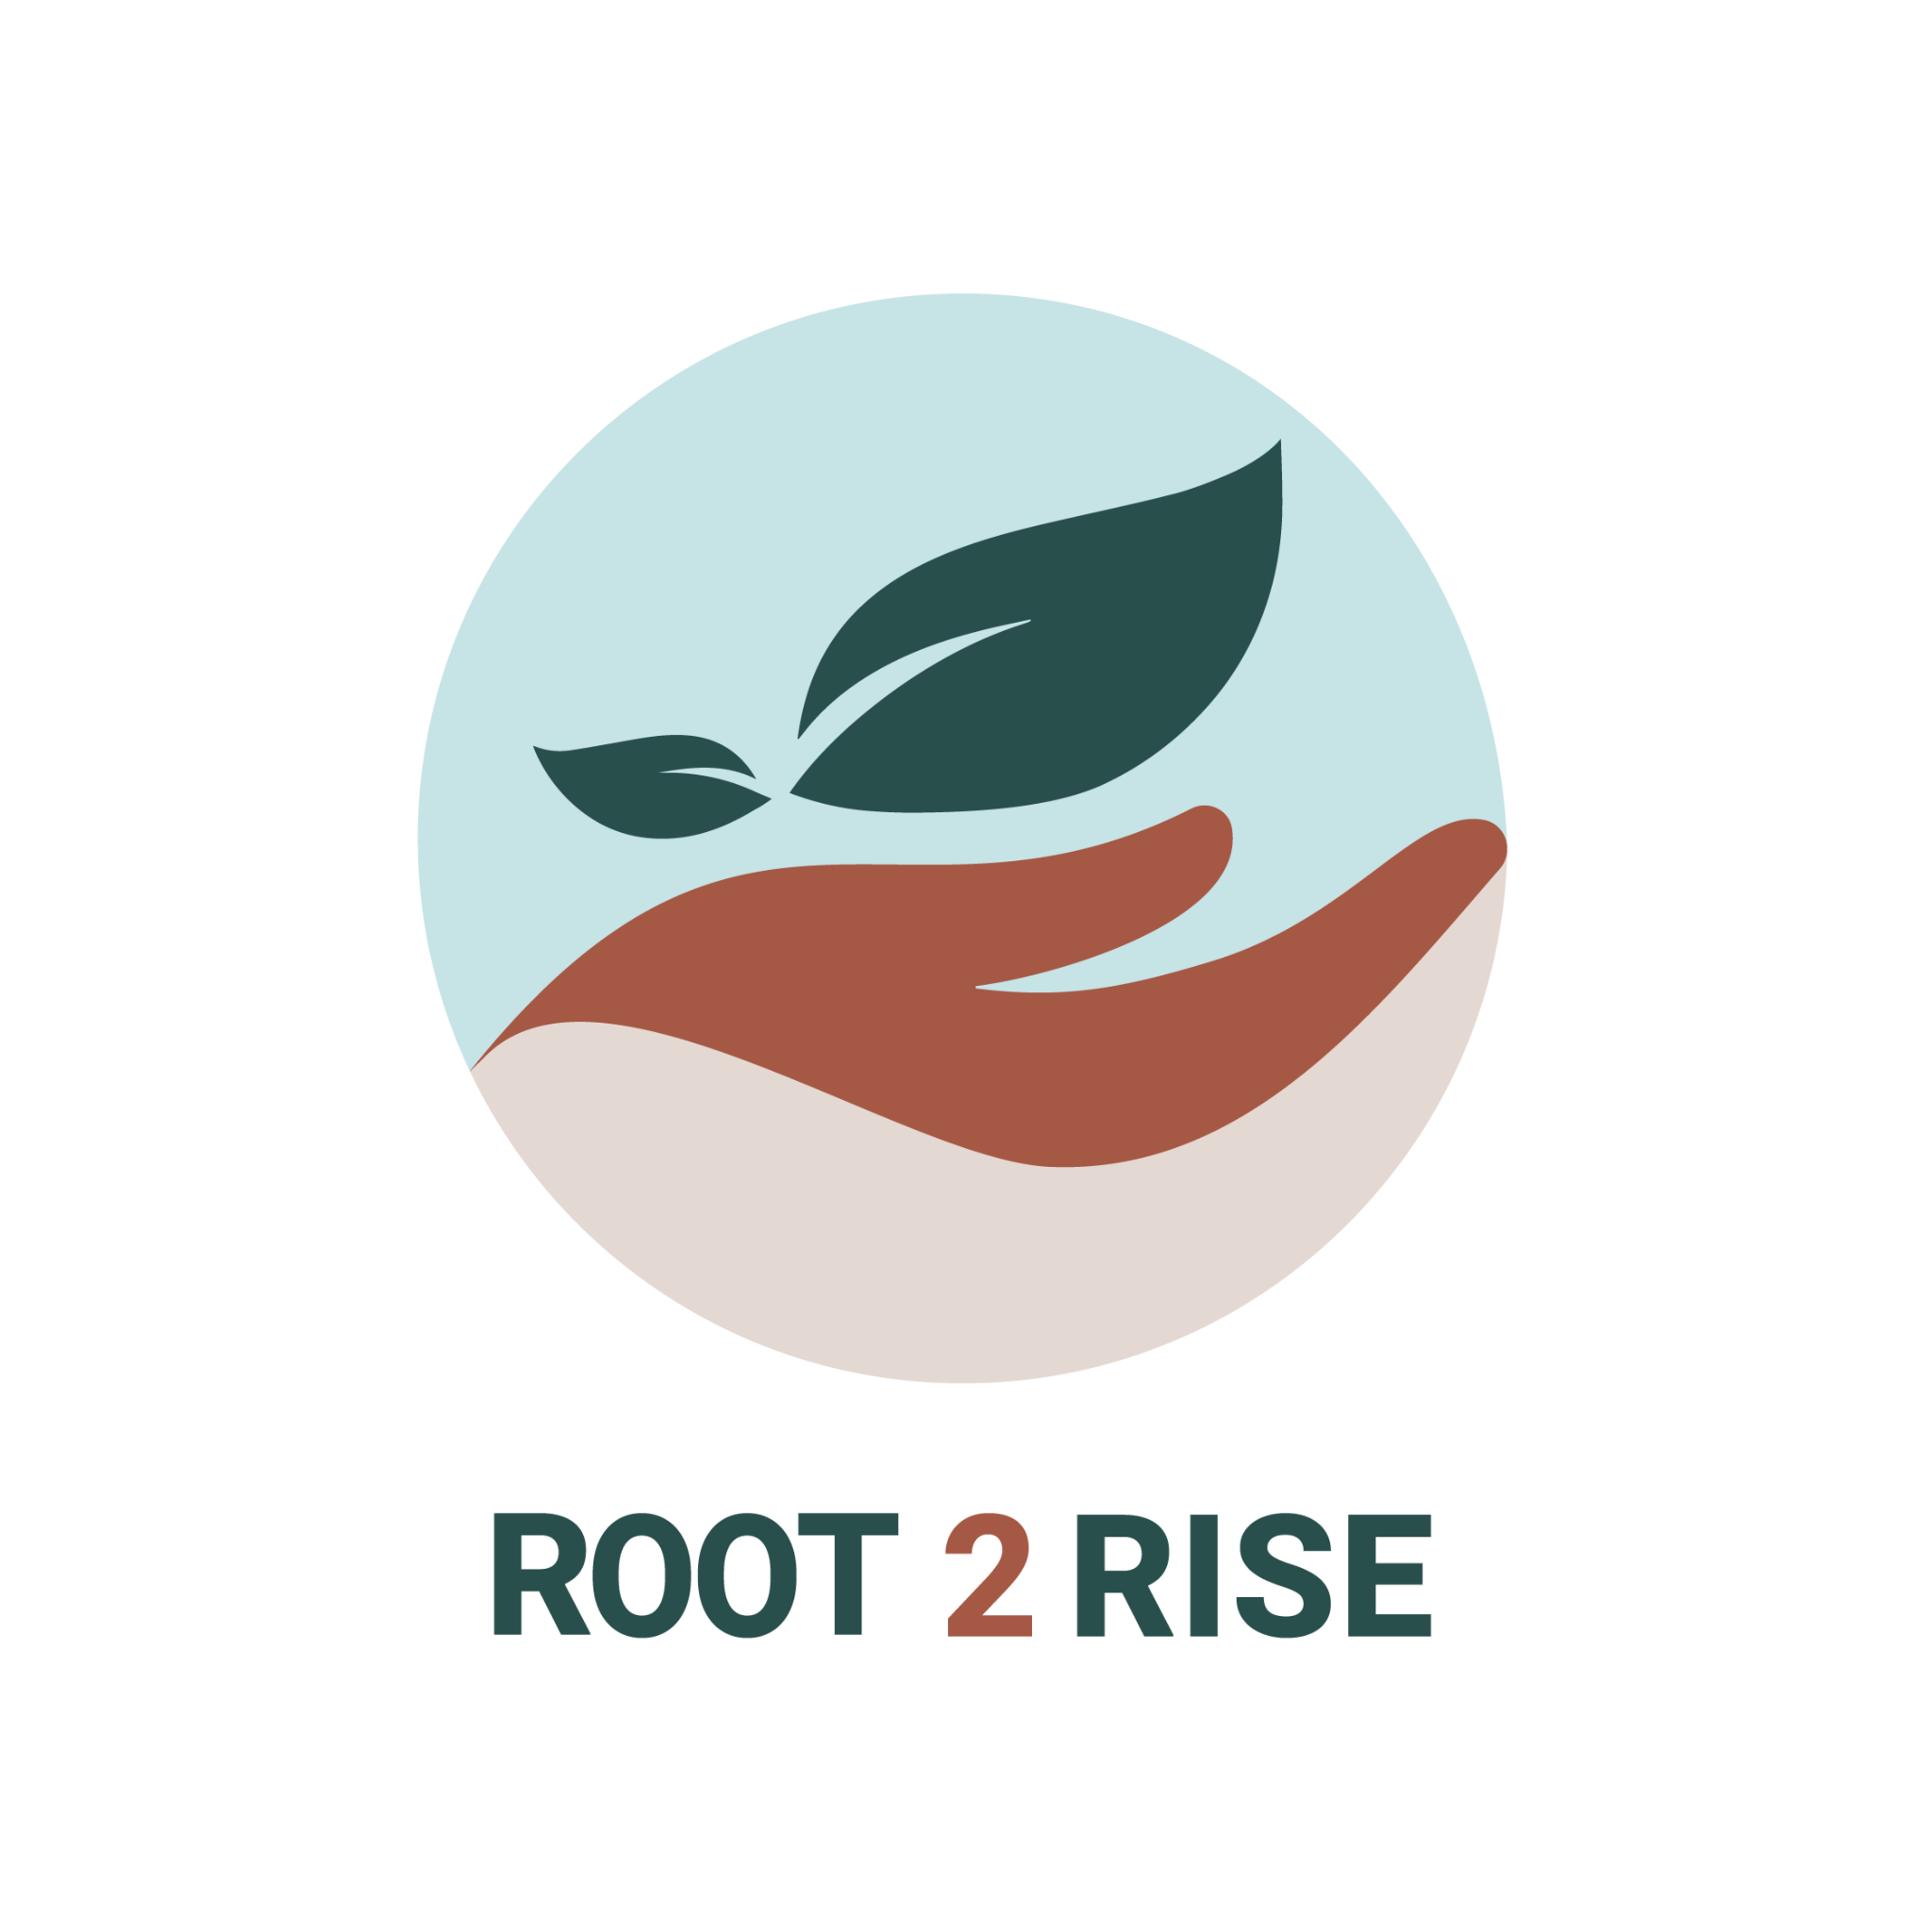 Root 2 Rise logo, a non-profit organization providing mentor-tutor programs for elementary students, featuring a stylized hand in terracotta supporting a sprouting leaf against a sky-blue background, symbolizing growth and support